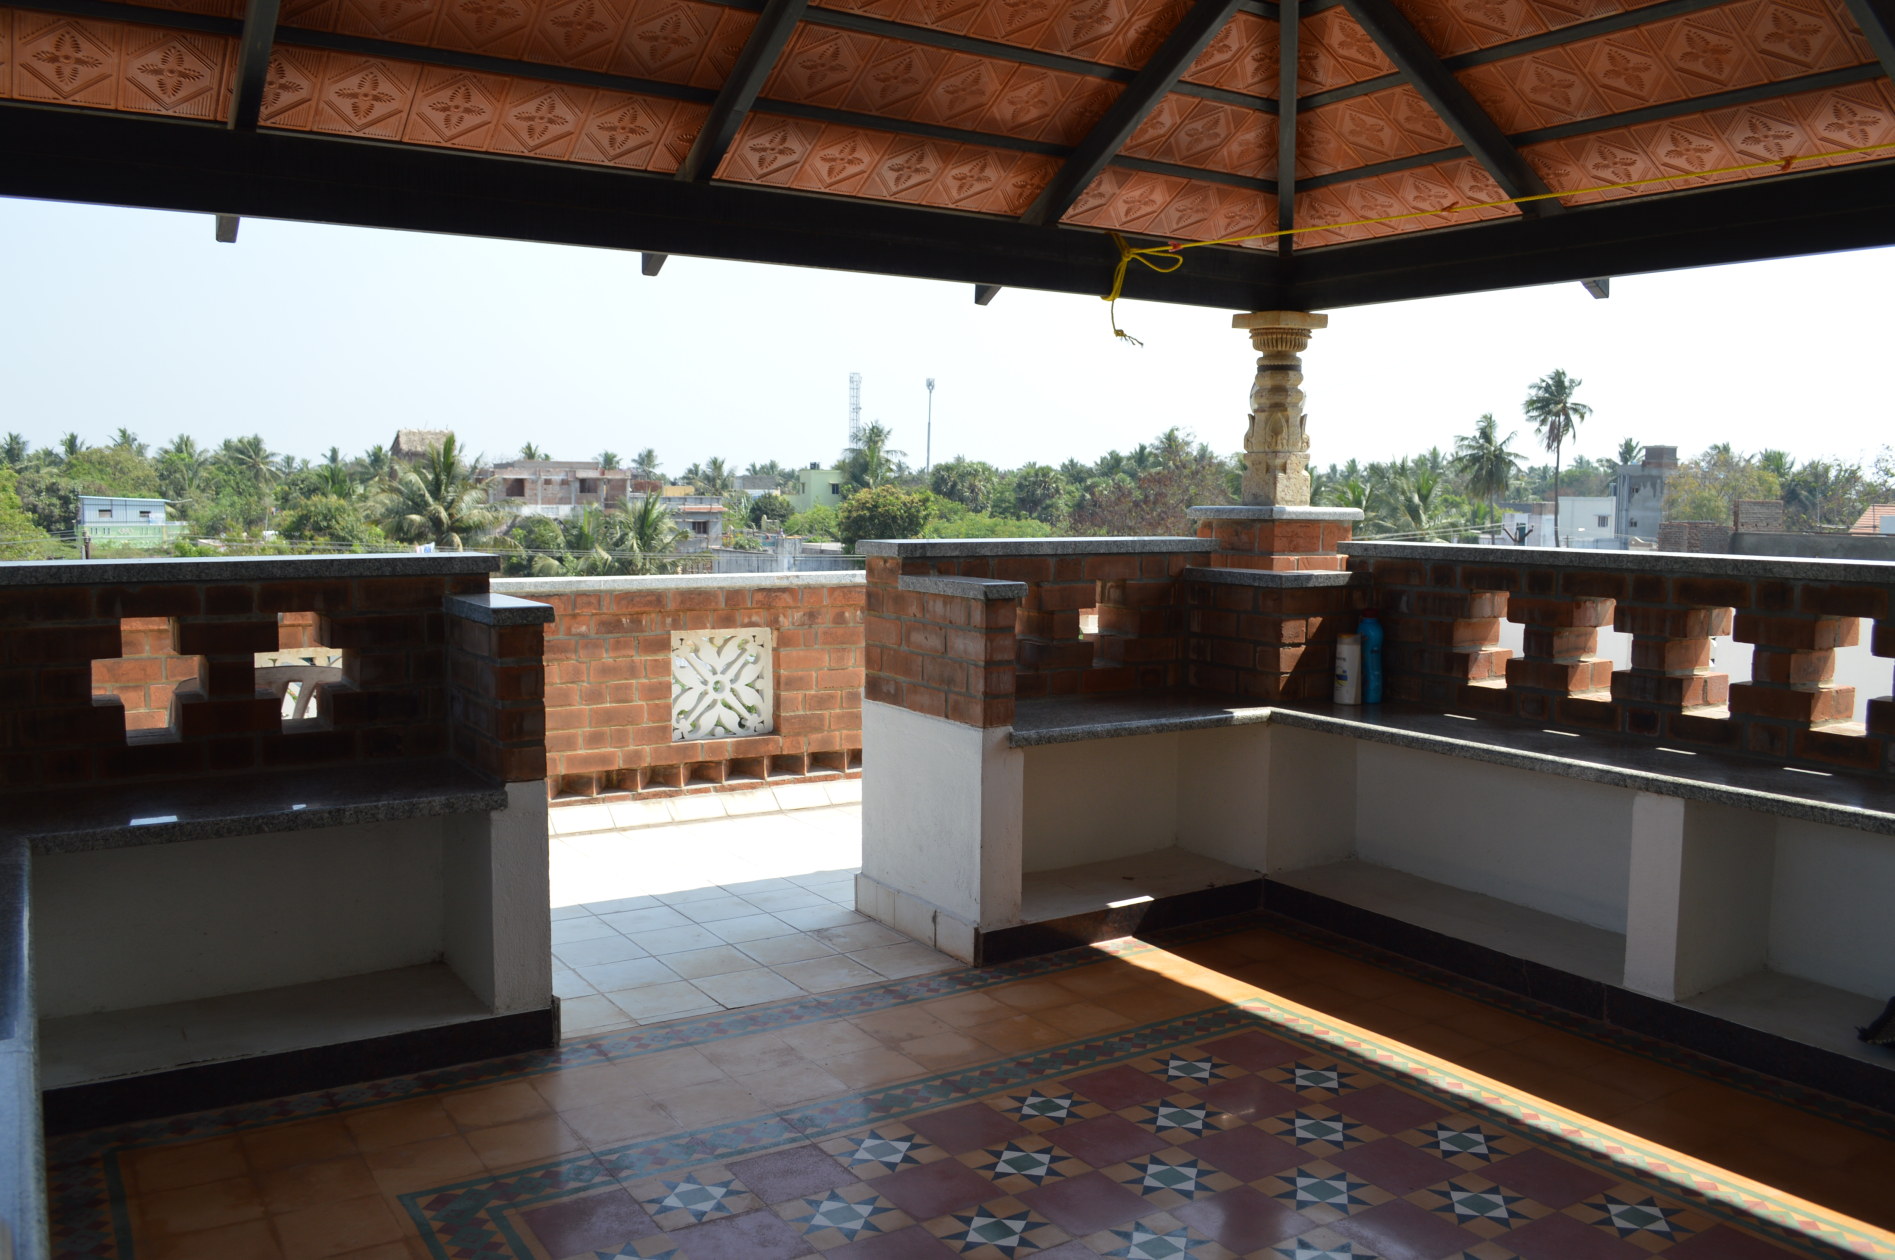 7 BHK Fully Furnished Luxury House For Rent in Chennai 7500 Sq Ft built in 5 Grounds 360 Property Chennai